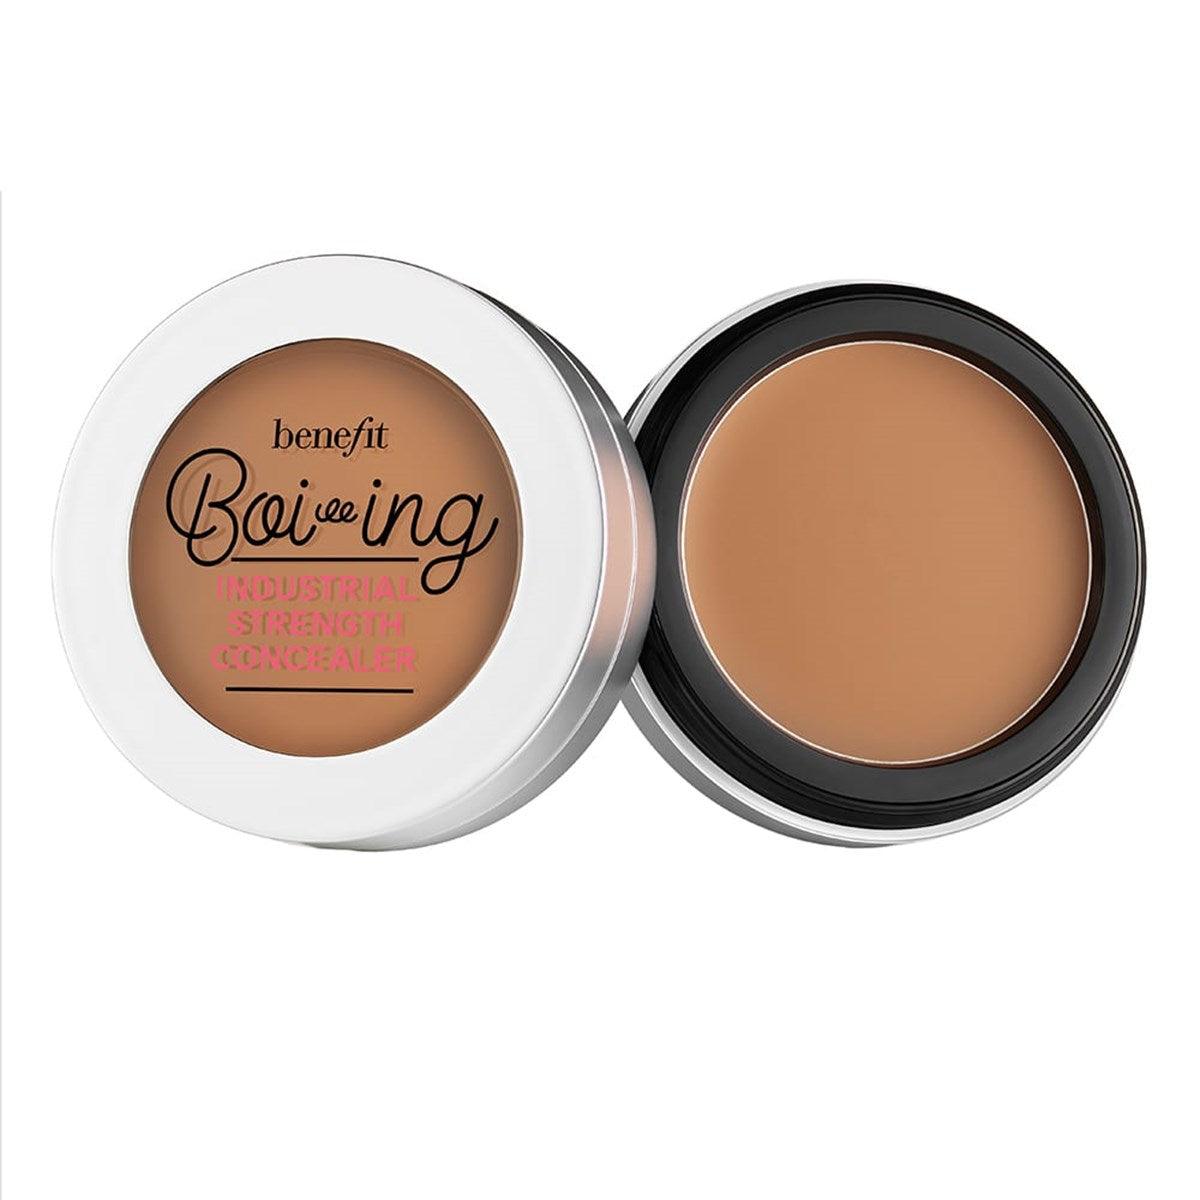 Boi-ing Industrial Concealer - RUTHERFORD & Co